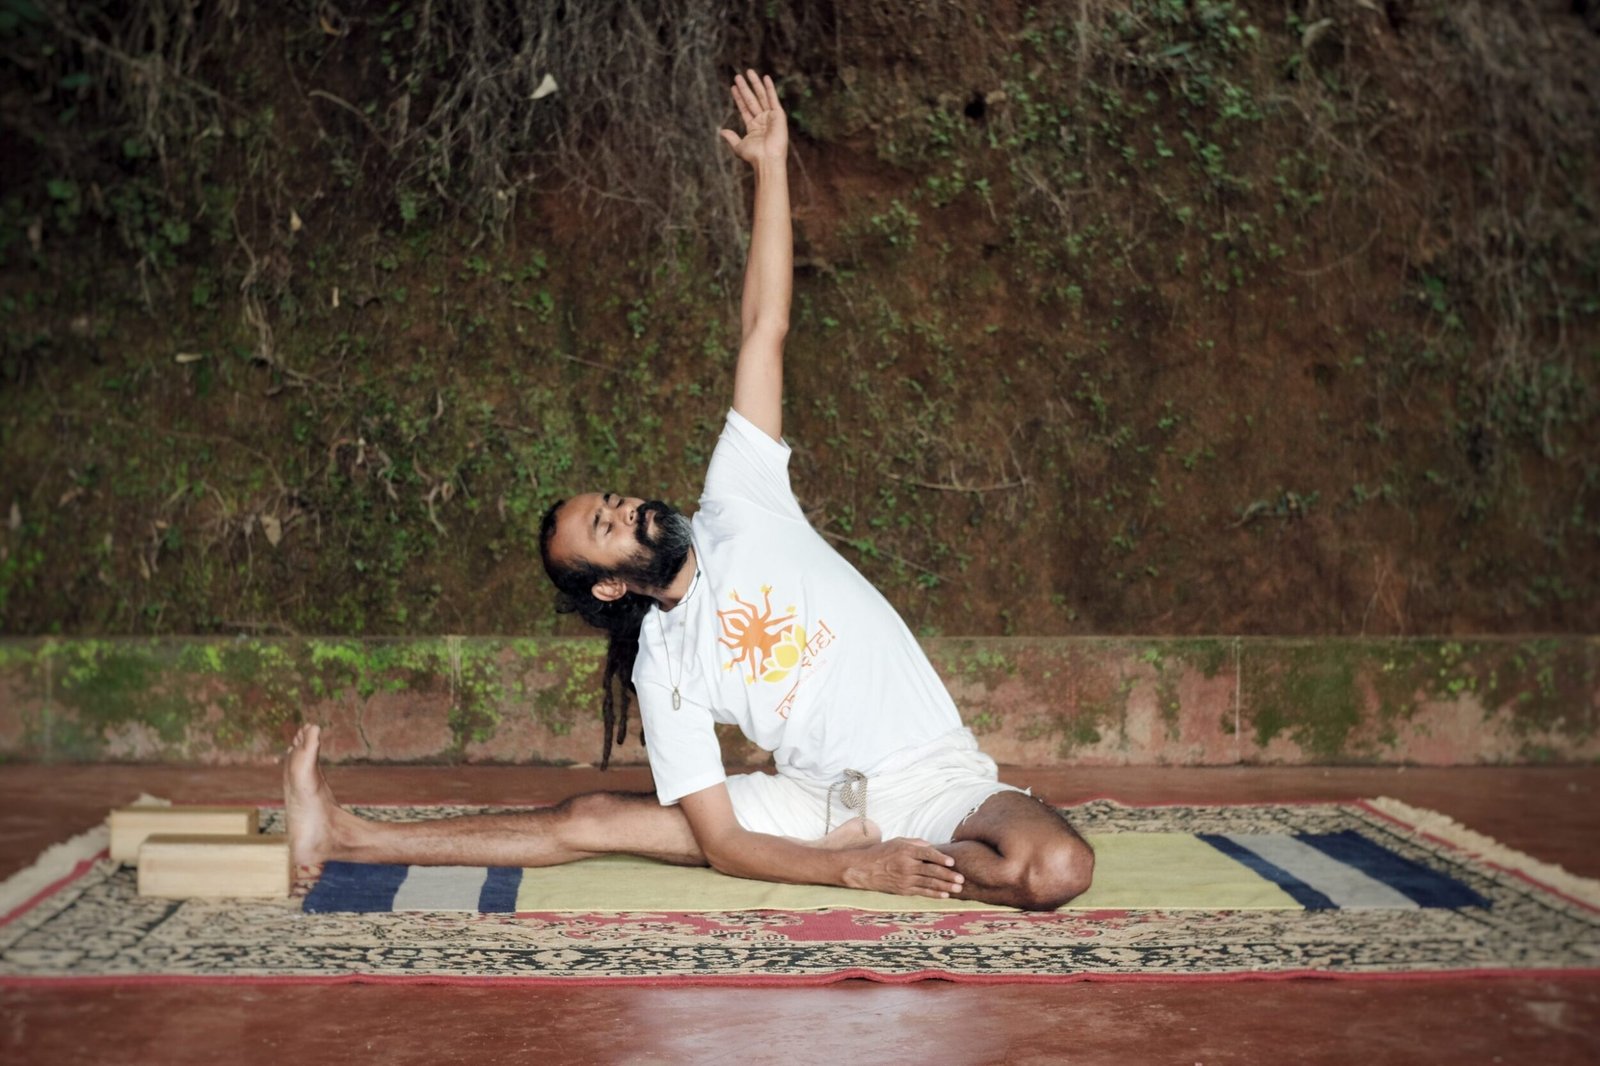 Yoga For Better Sex: 5 Yoga Poses to Help Men Improve Their Sex Life